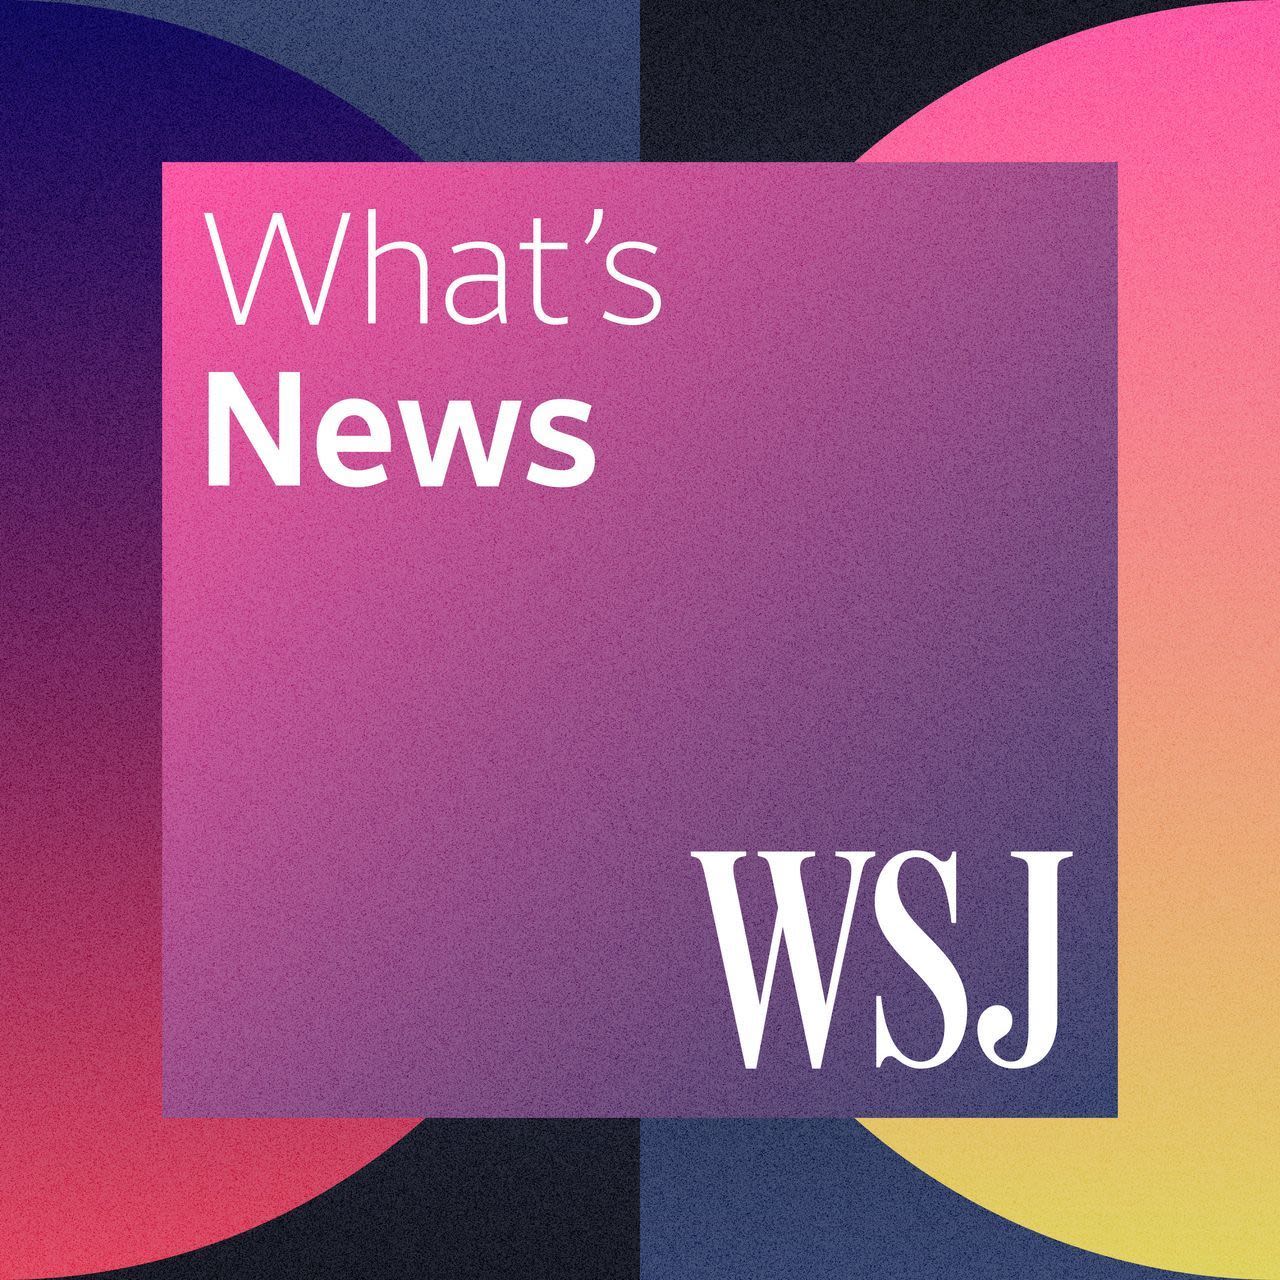 Governments Crack Down on Free Press, Copying the Kremlin - What’s News - WSJ Podcasts